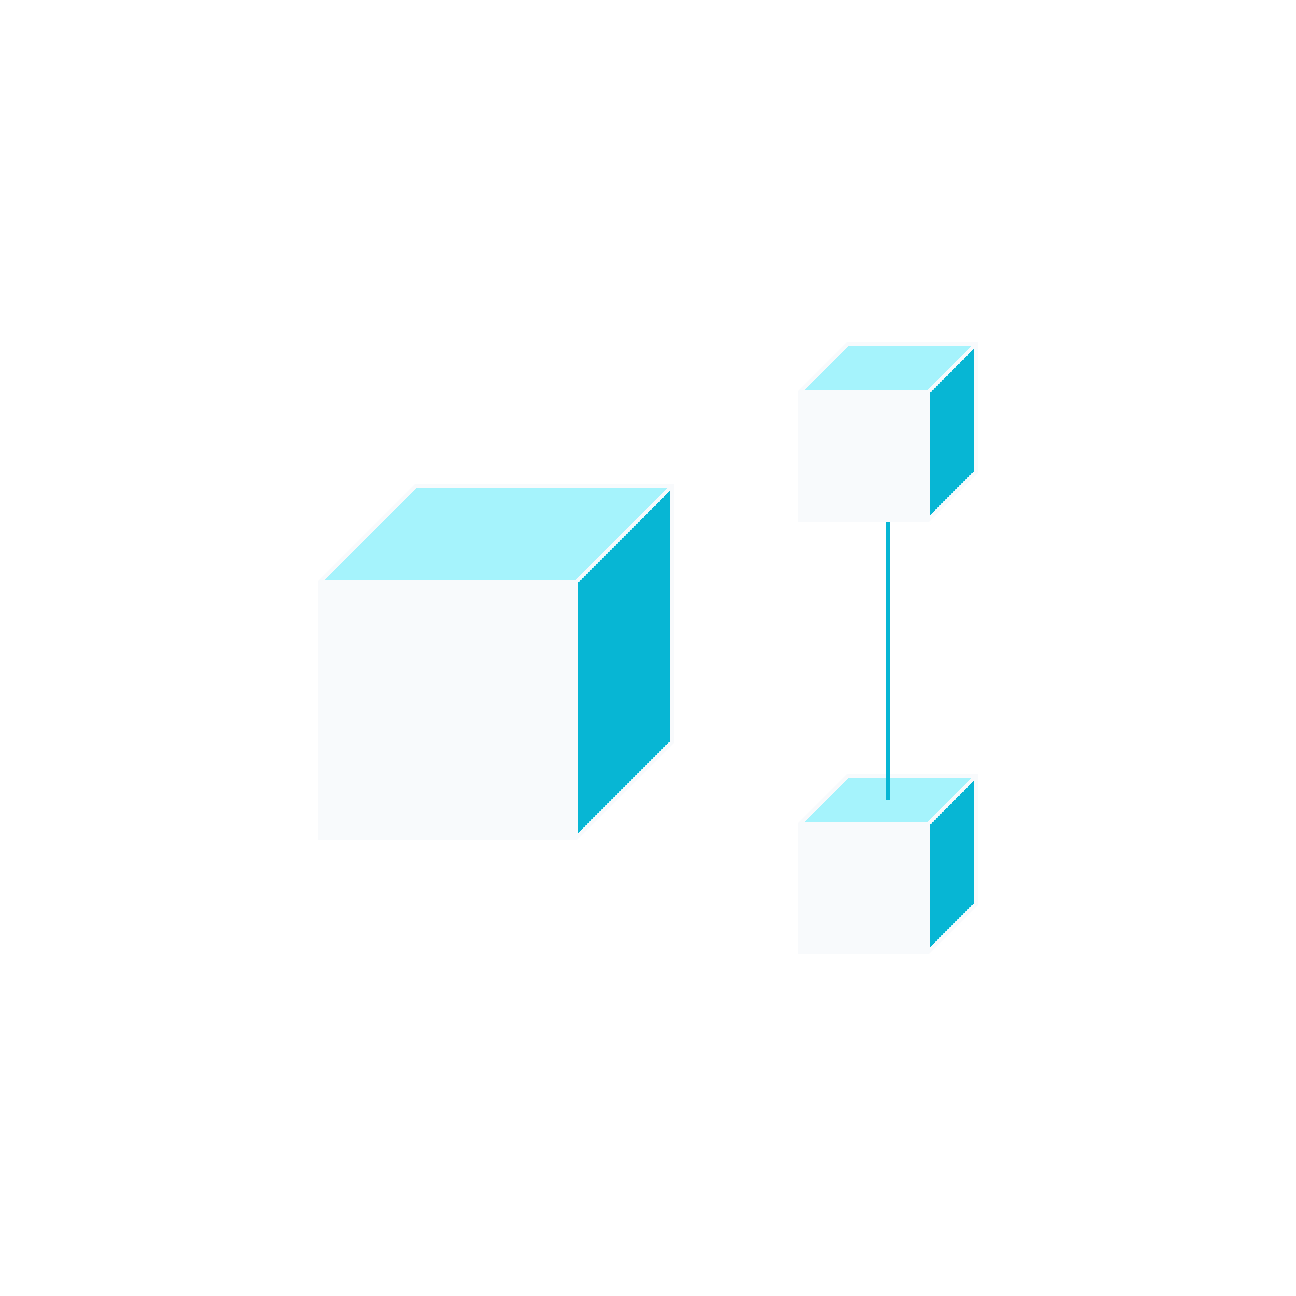 a cube with two smaller cubes to the right connected by a line